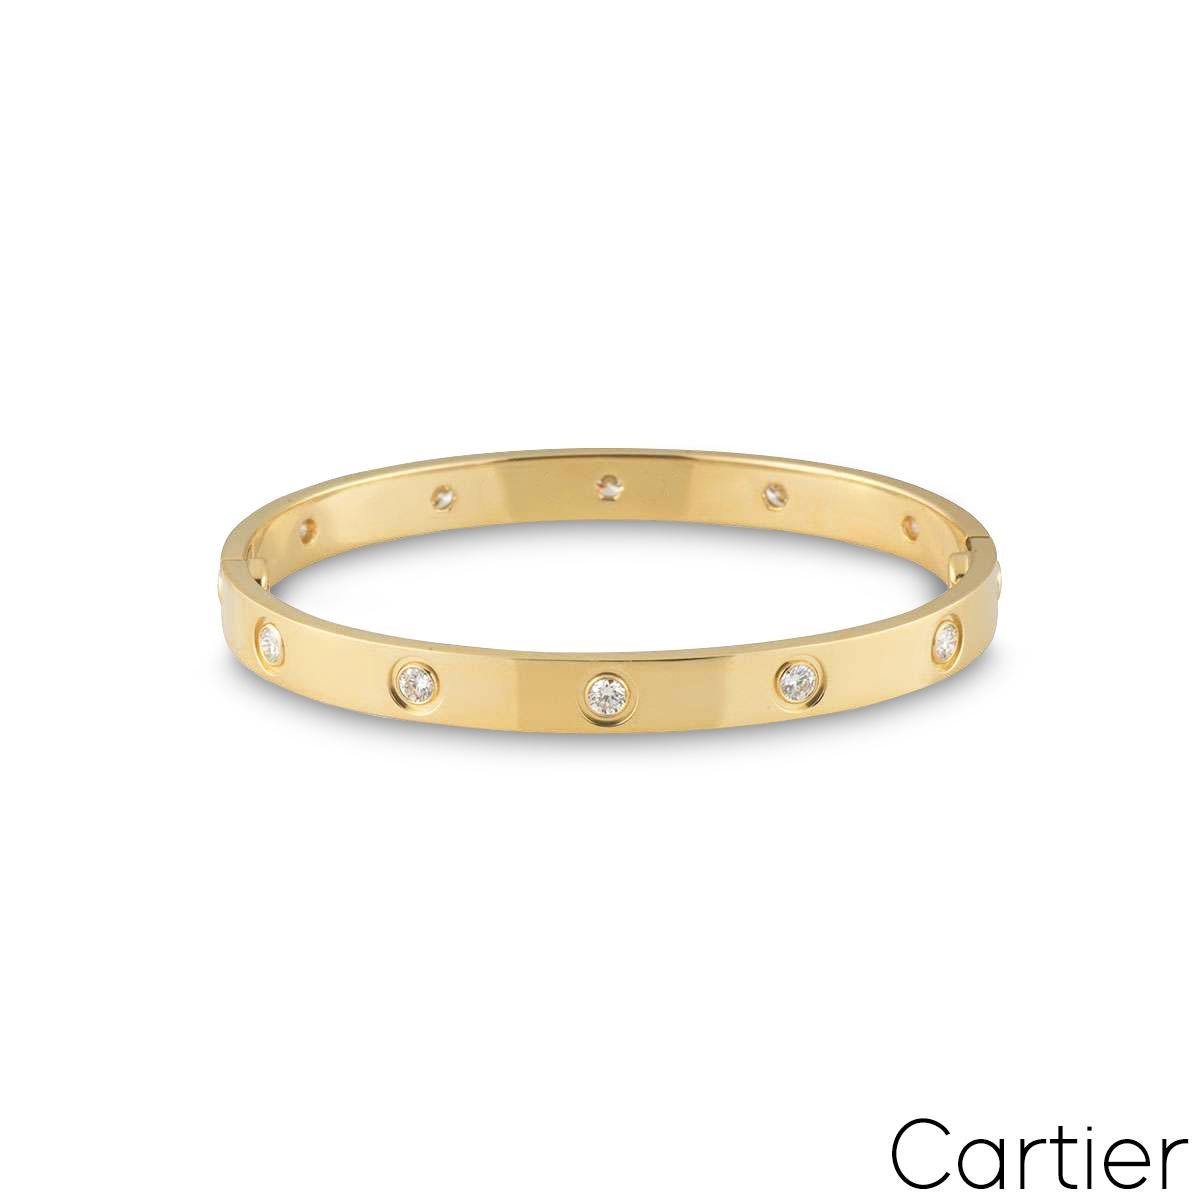 An 18k yellow gold full diamond bracelet by Cartier from the Love collection. The bracelet is set with 10 round brilliant cut diamonds in a rubover setting circulating throughout the outer edge, totalling 0.96ct. The bracelet is a size 16, features